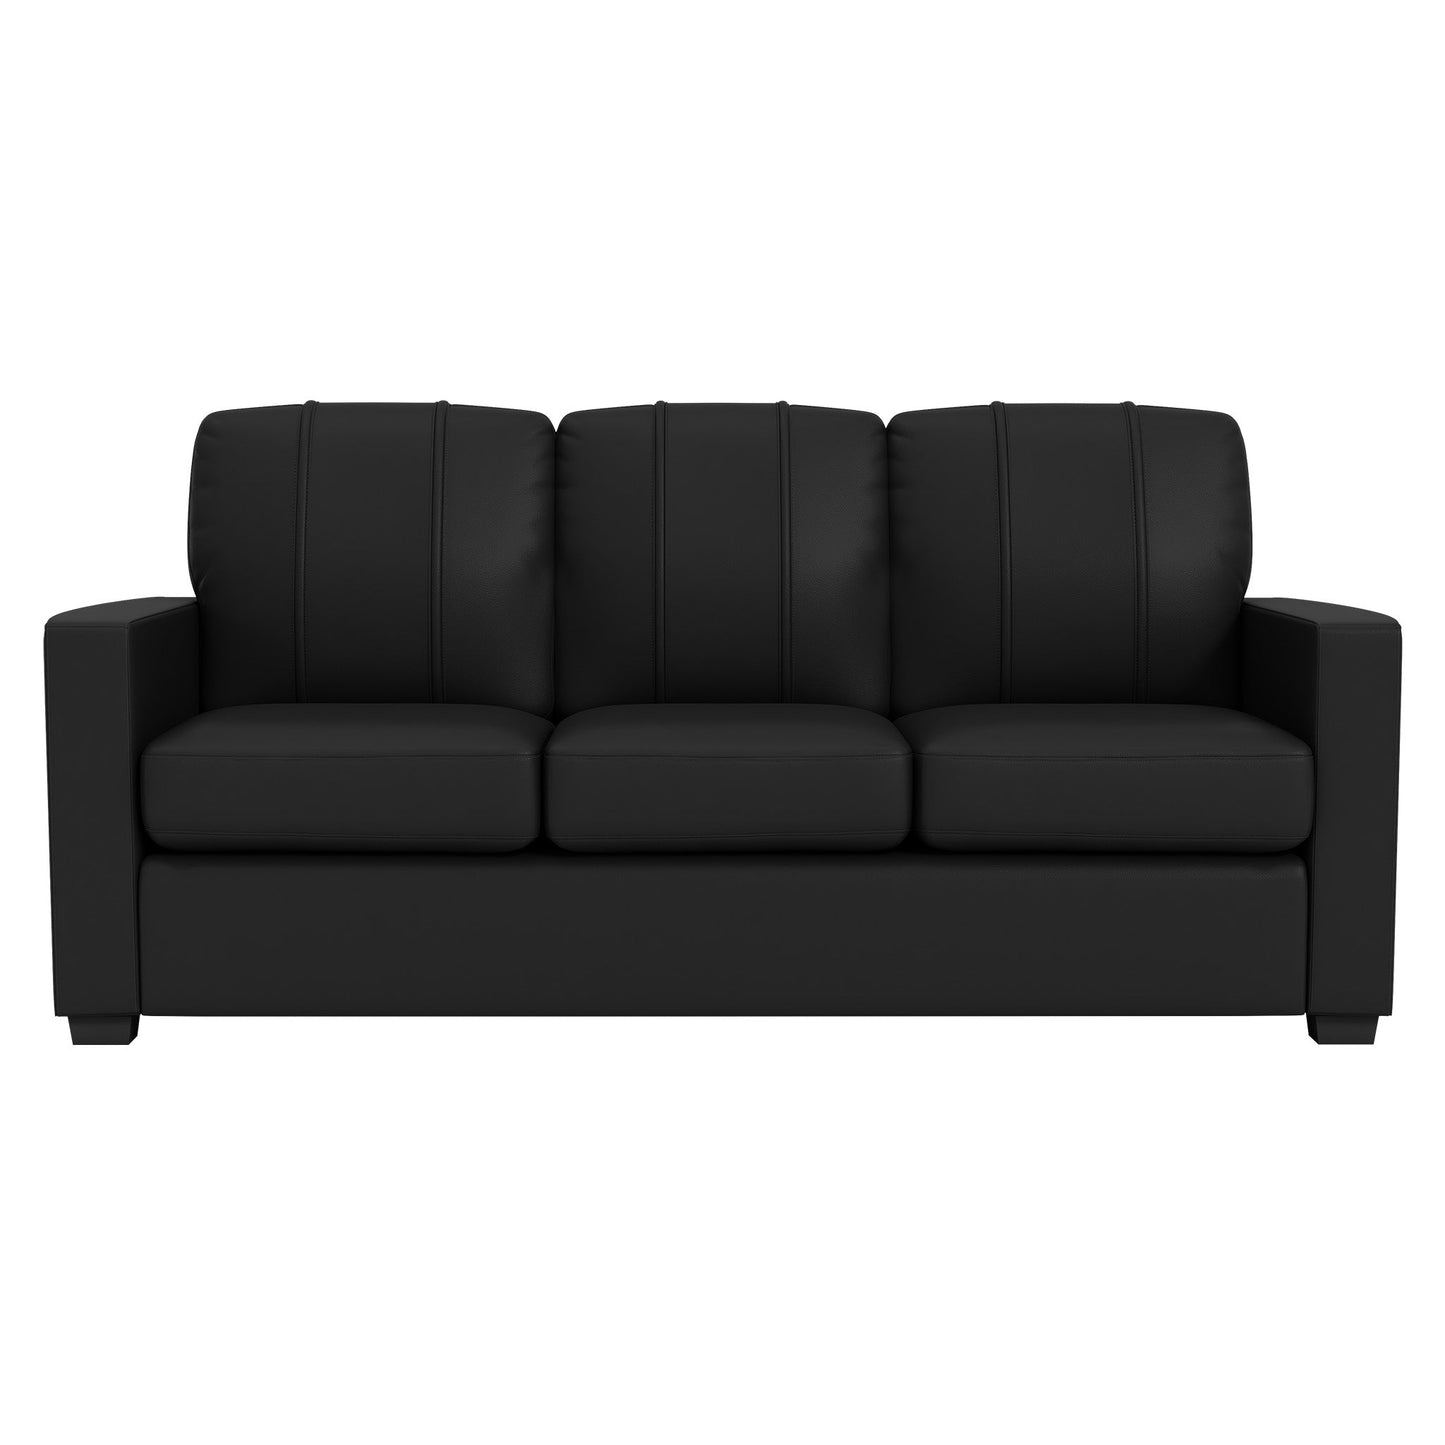 Silver Sofa with San Diego Padres Primary Logo